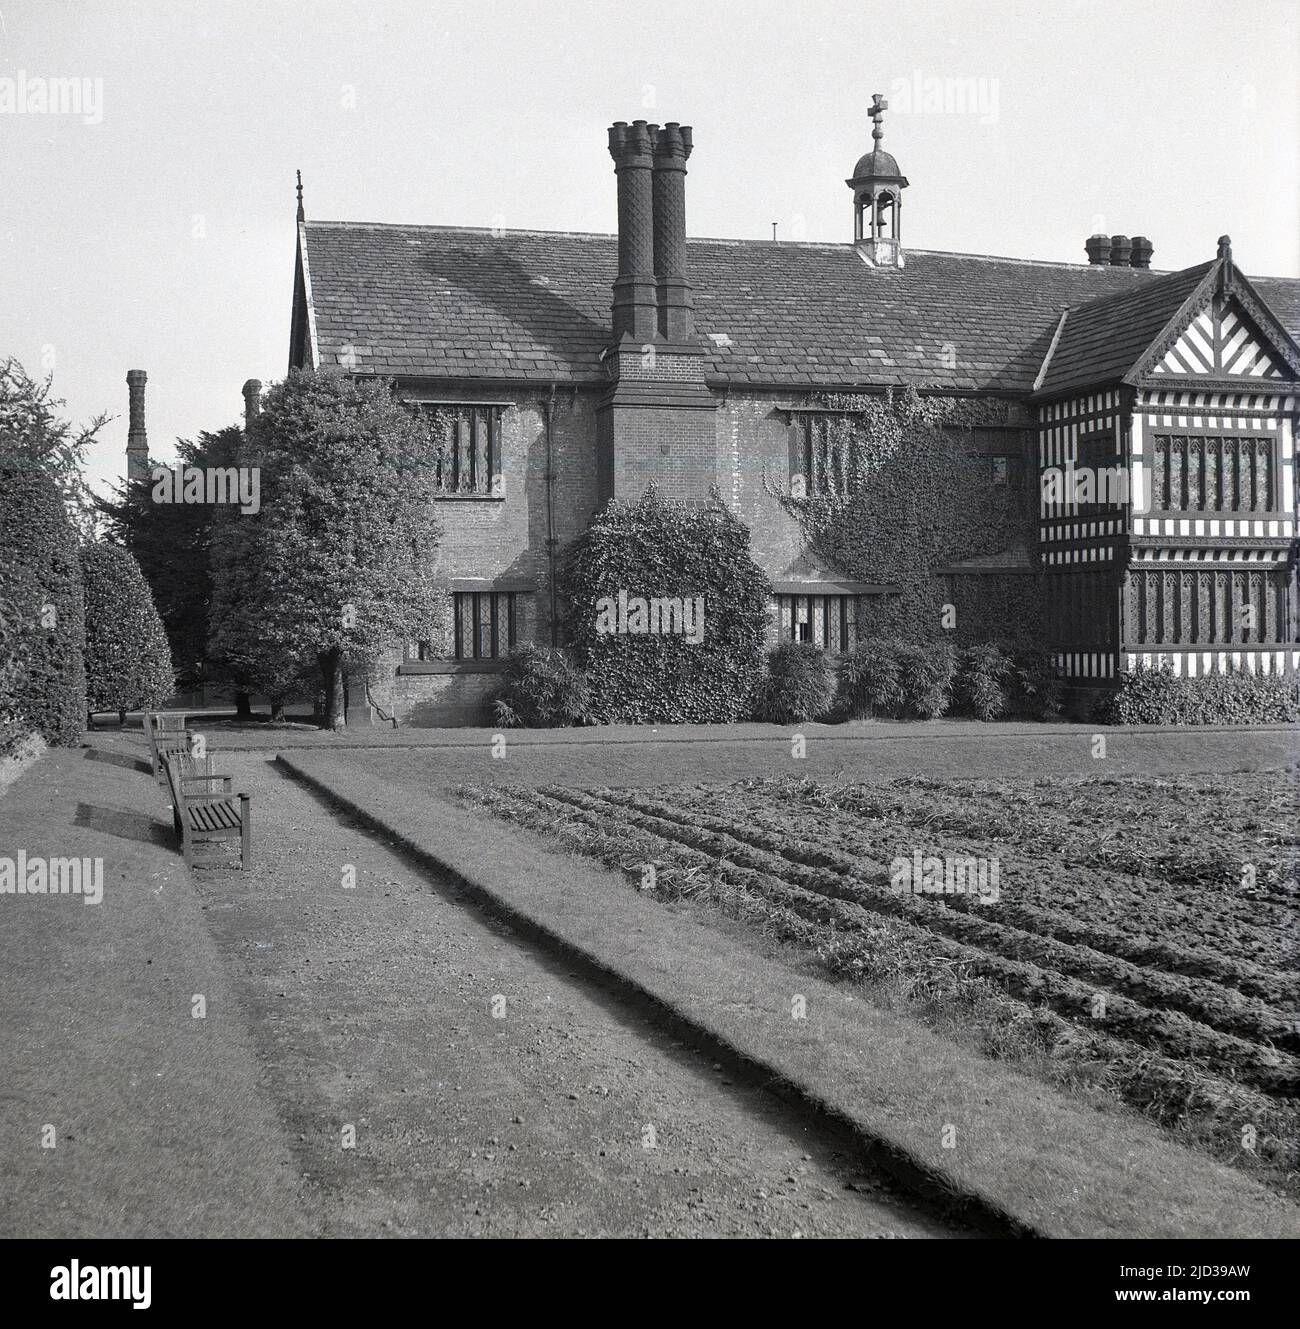 1940s, historical, South facade, the rear of Bramall Hall, Stockport, England, UK. A timber-framed Tudor manor house that dates back to the 14th century, with later additions, the house and surrounding parkland was acquired by the local authority in 1935 and became a museum. The Davenport family, which it is believed built the house, held the manor for over 500 years. Stock Photo